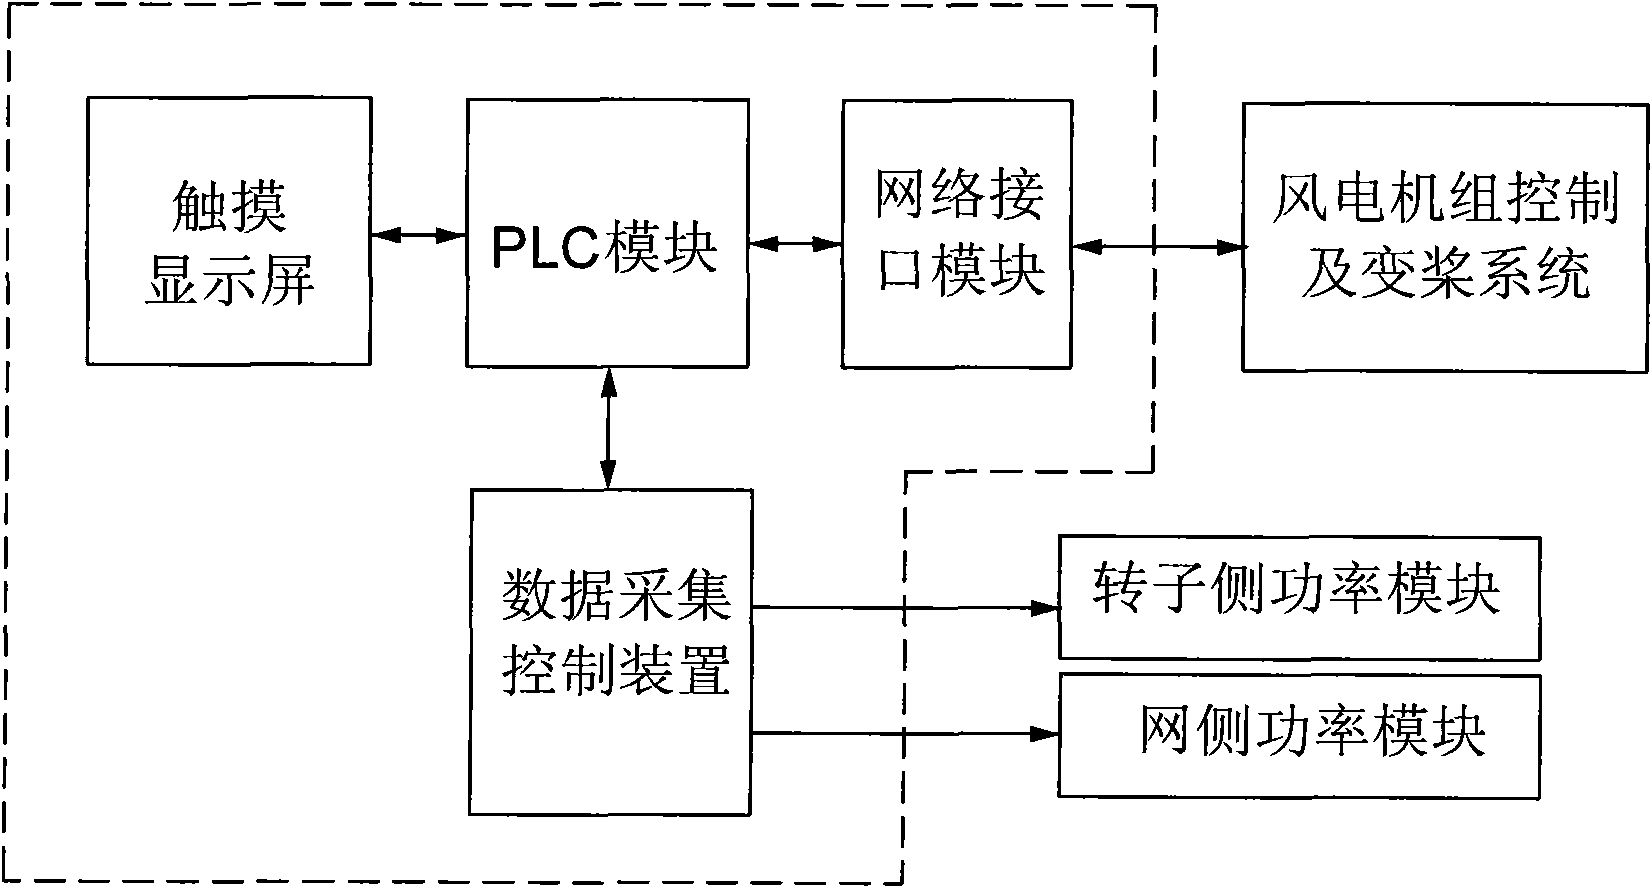 Controller of converter of dual-fed wind power generator